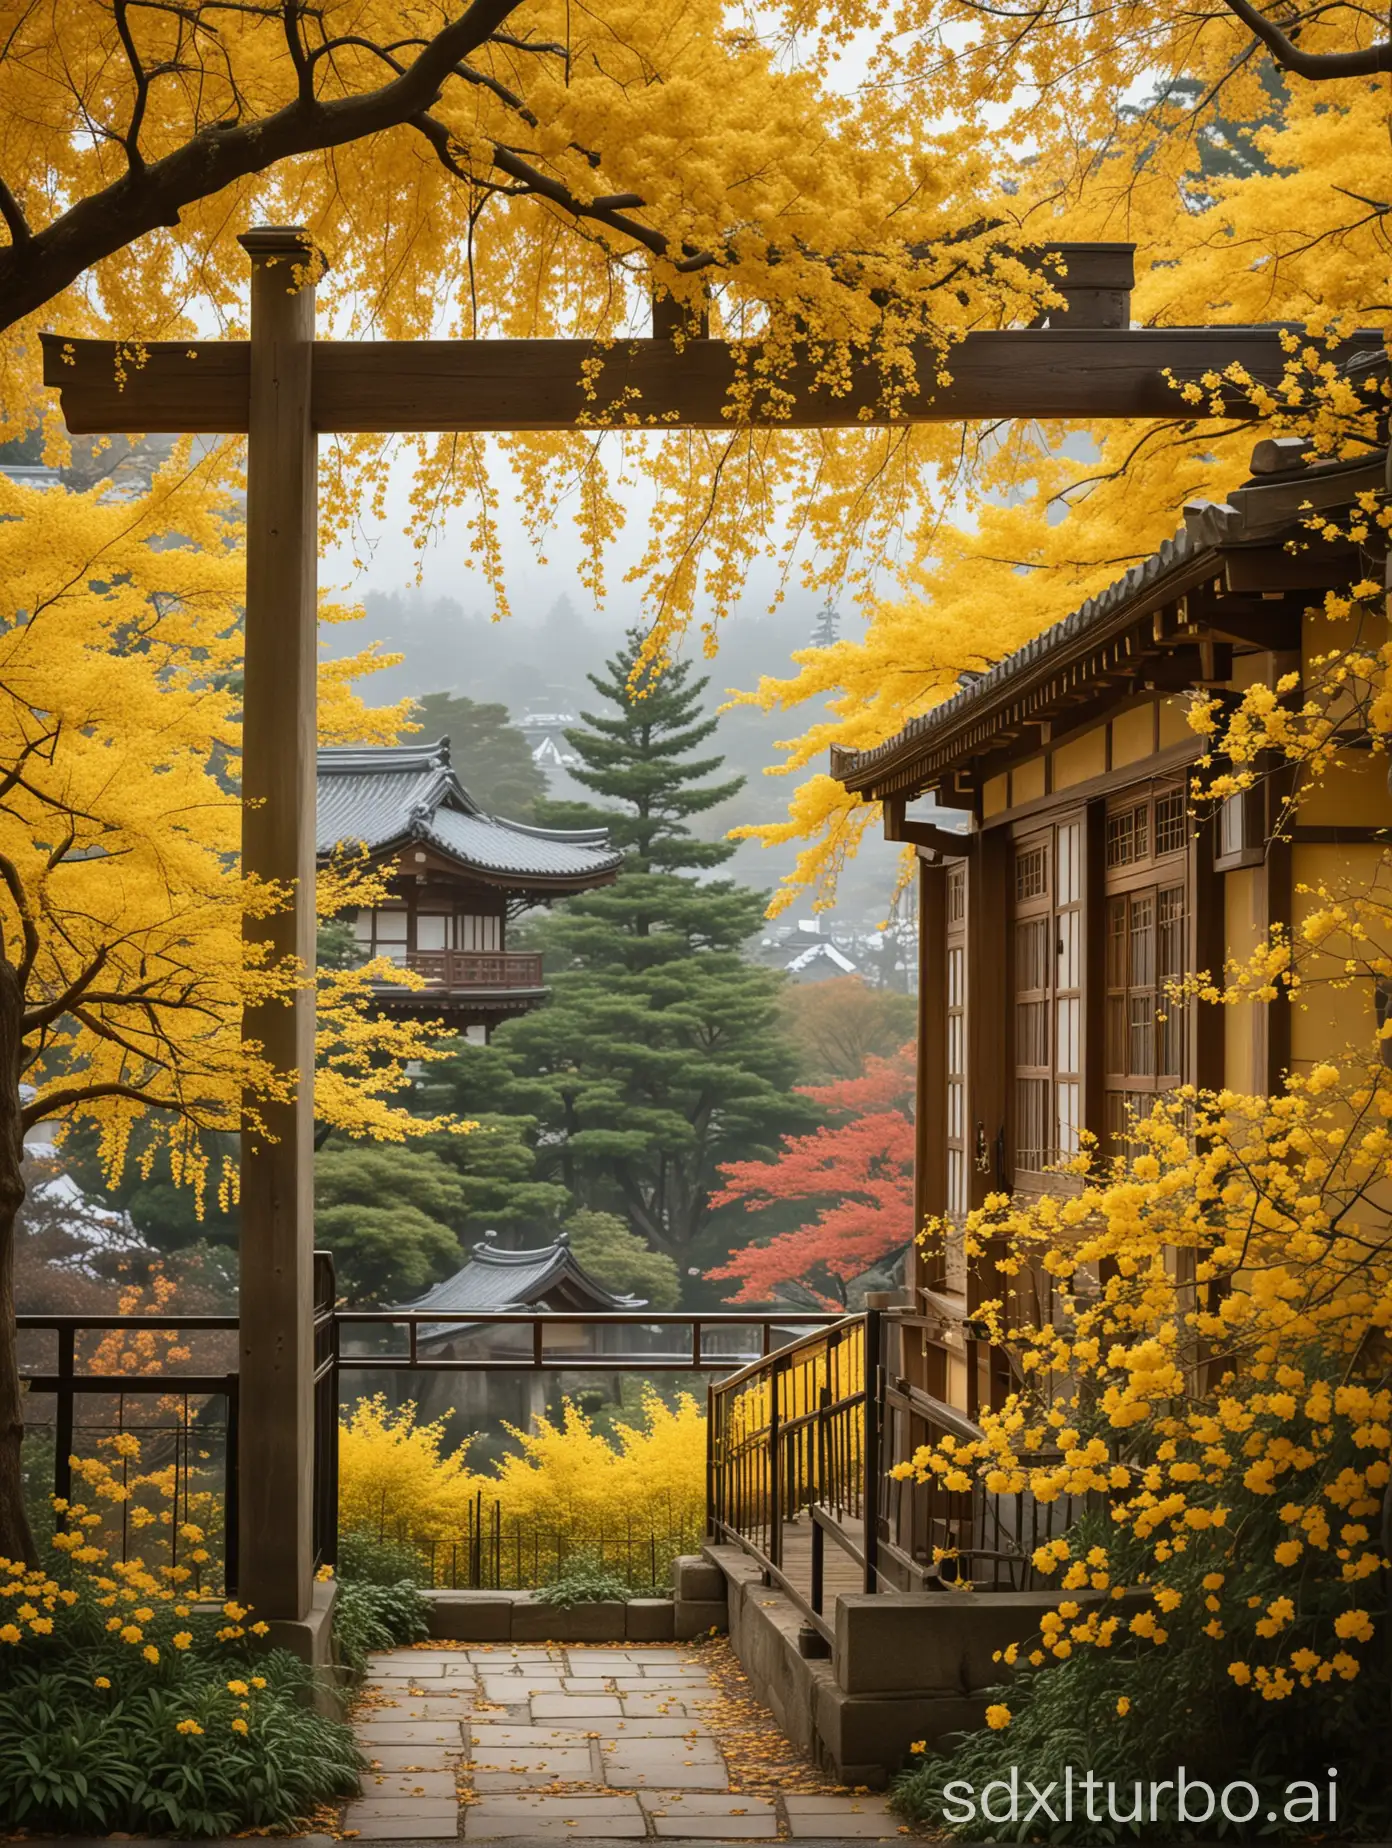 In a close-up view, the radiant yellow blooms take center stage, their delicate petals capturing the essence of ((natural)) beauty. Behind them, the elegant lines of Japanese architecture stand as a testament to ((time-honored)) craftsmanship and grace. This romantic scene is truly ((idyllic)), with the juxtaposition of vibrant flowers and serene architecture creating a harmonious blend of ((peace)) and ((tranquility)). It's a moment frozen in time, where the soul finds solace and the heart finds ((harmony)) amidst the gentle embrace of nature's ((awe)).